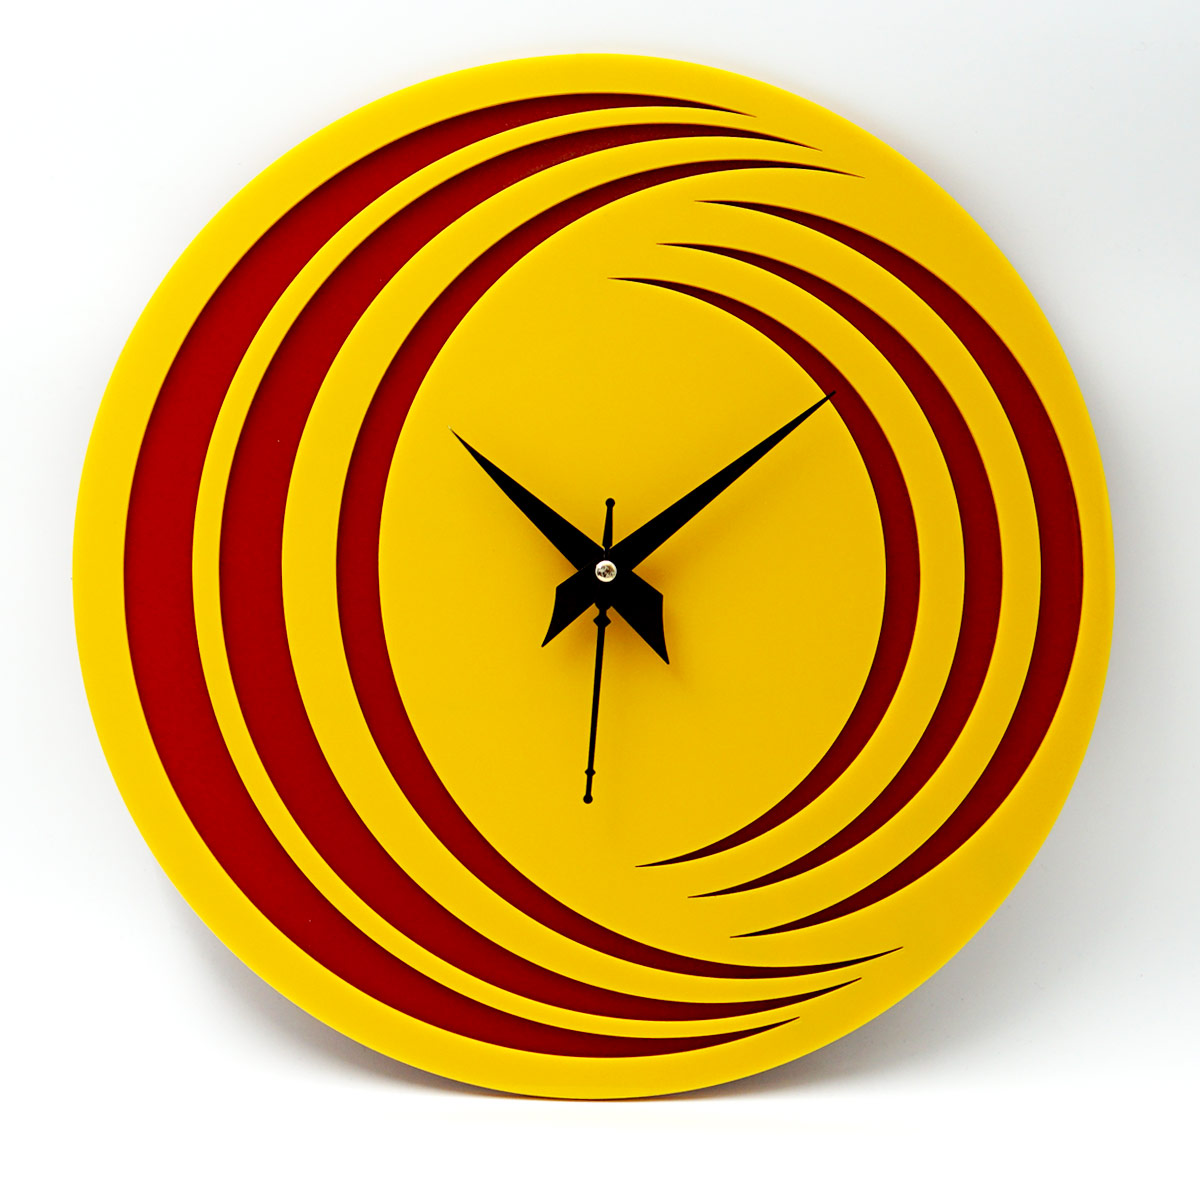 penhouse.in Customizable Acrylic Red With Yellow Color Striped Circle Design Wall Clock SKU ACC003